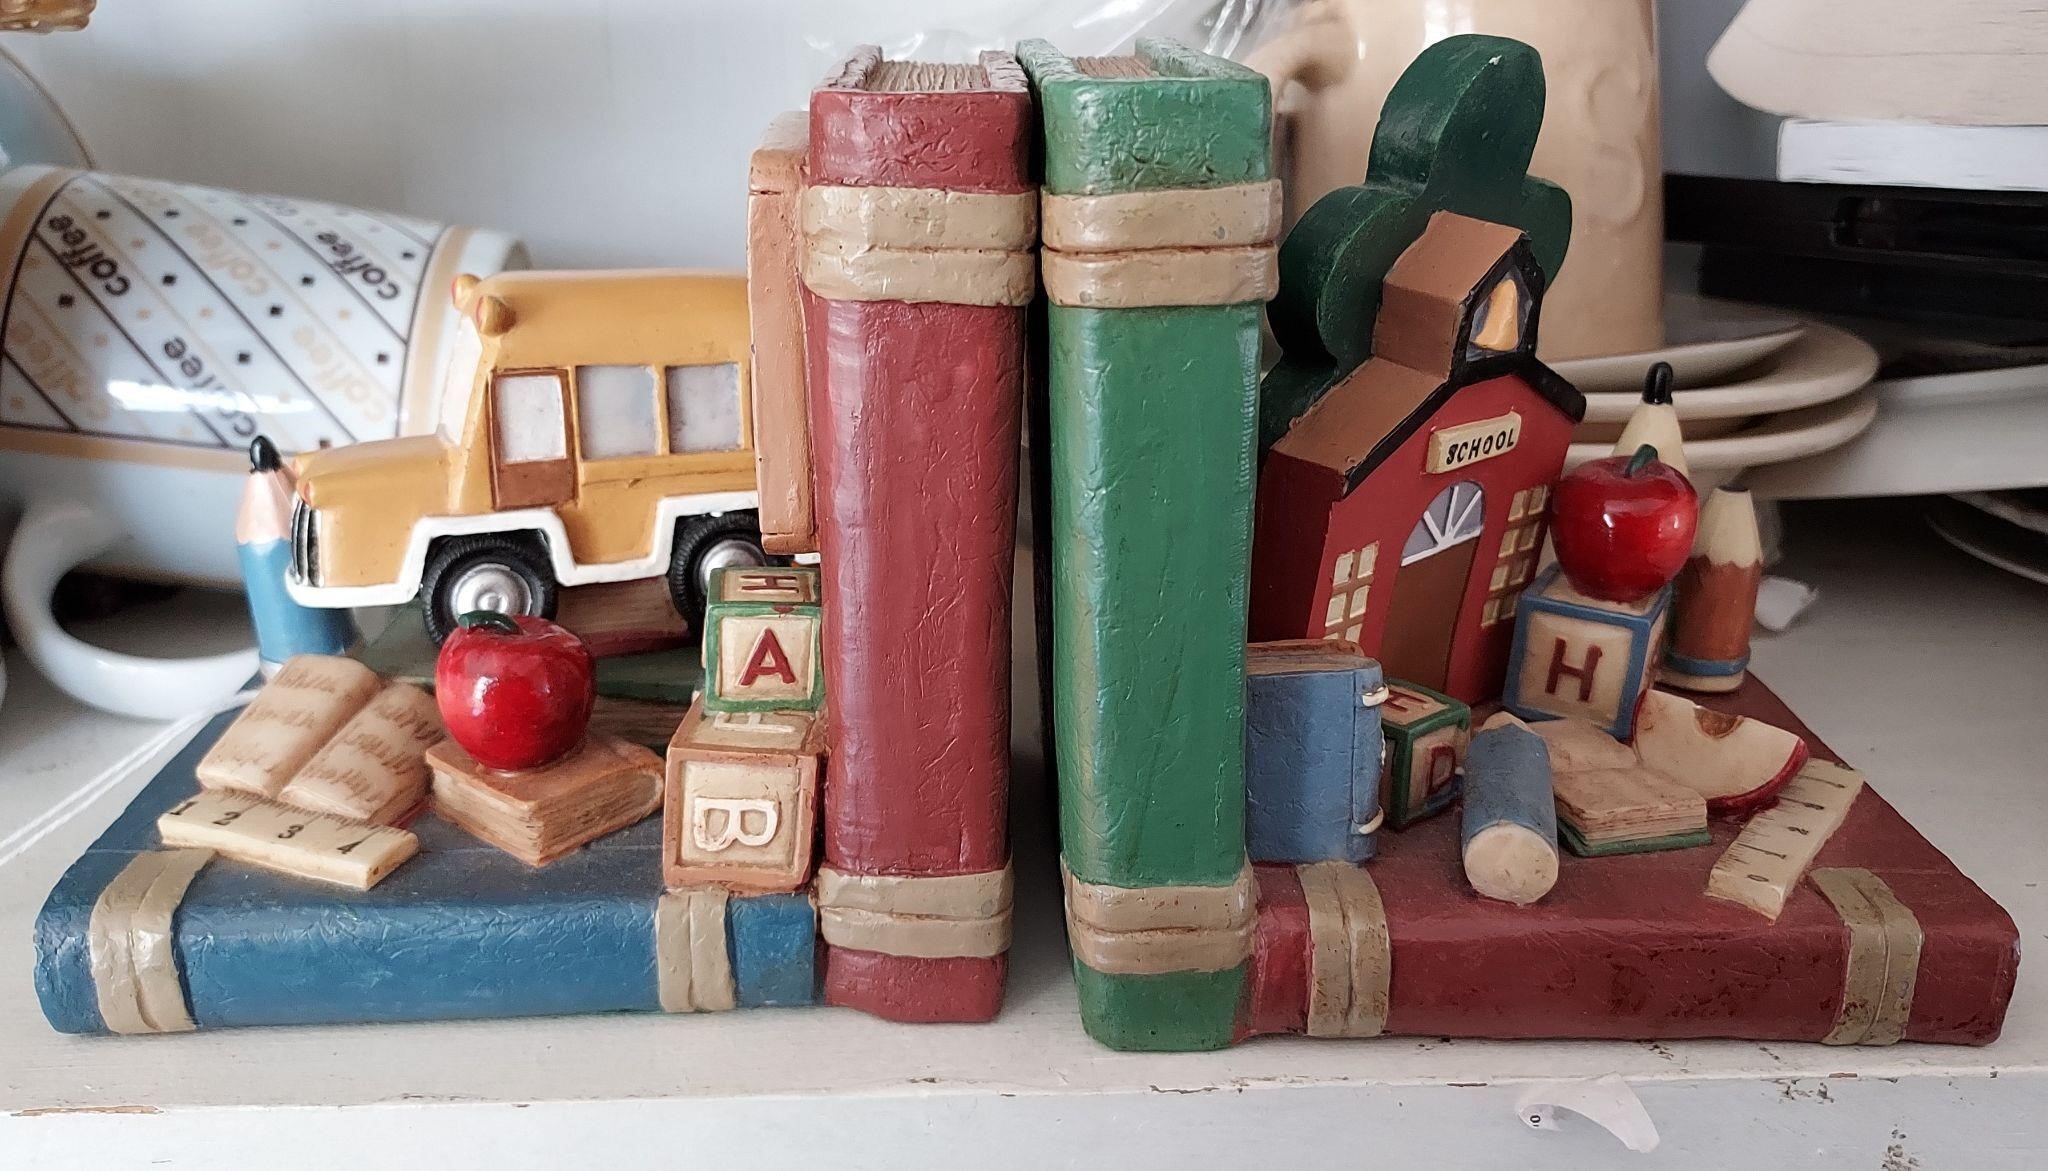 Adorable Bookends would make a great teacher gift